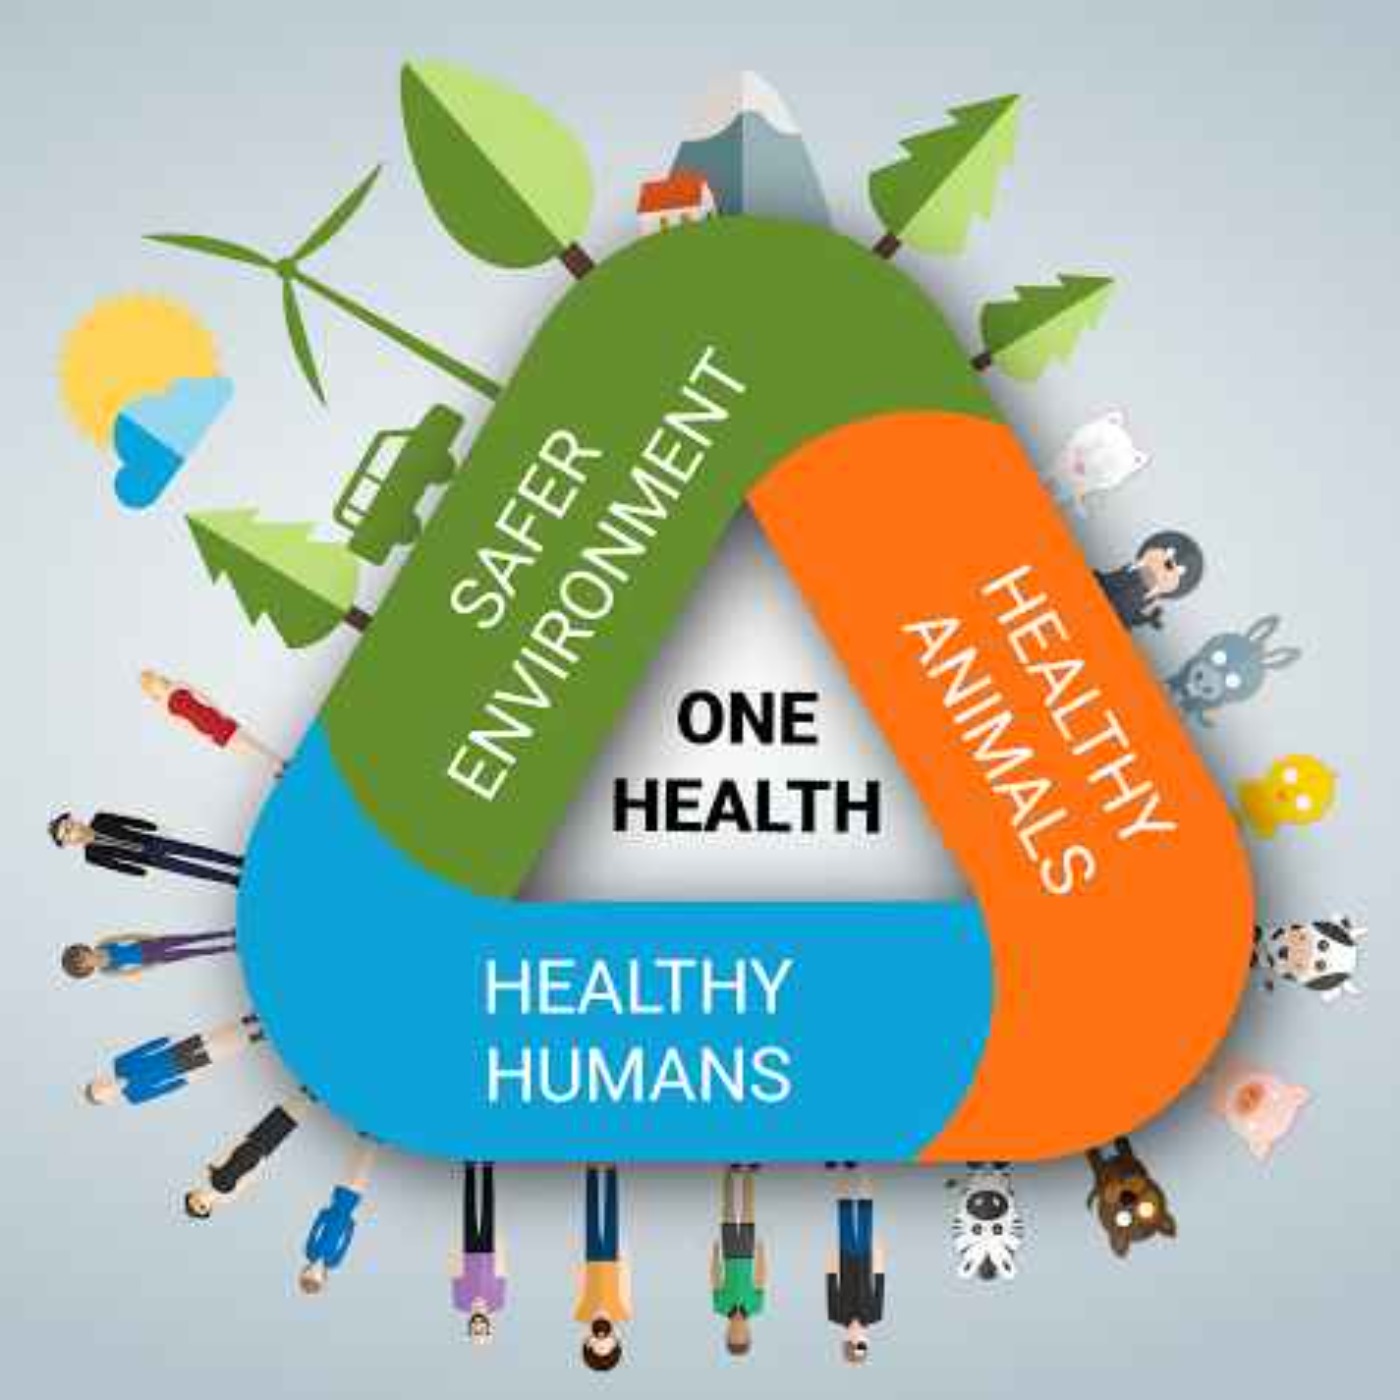 Vets, Sustainability & 'One Health'